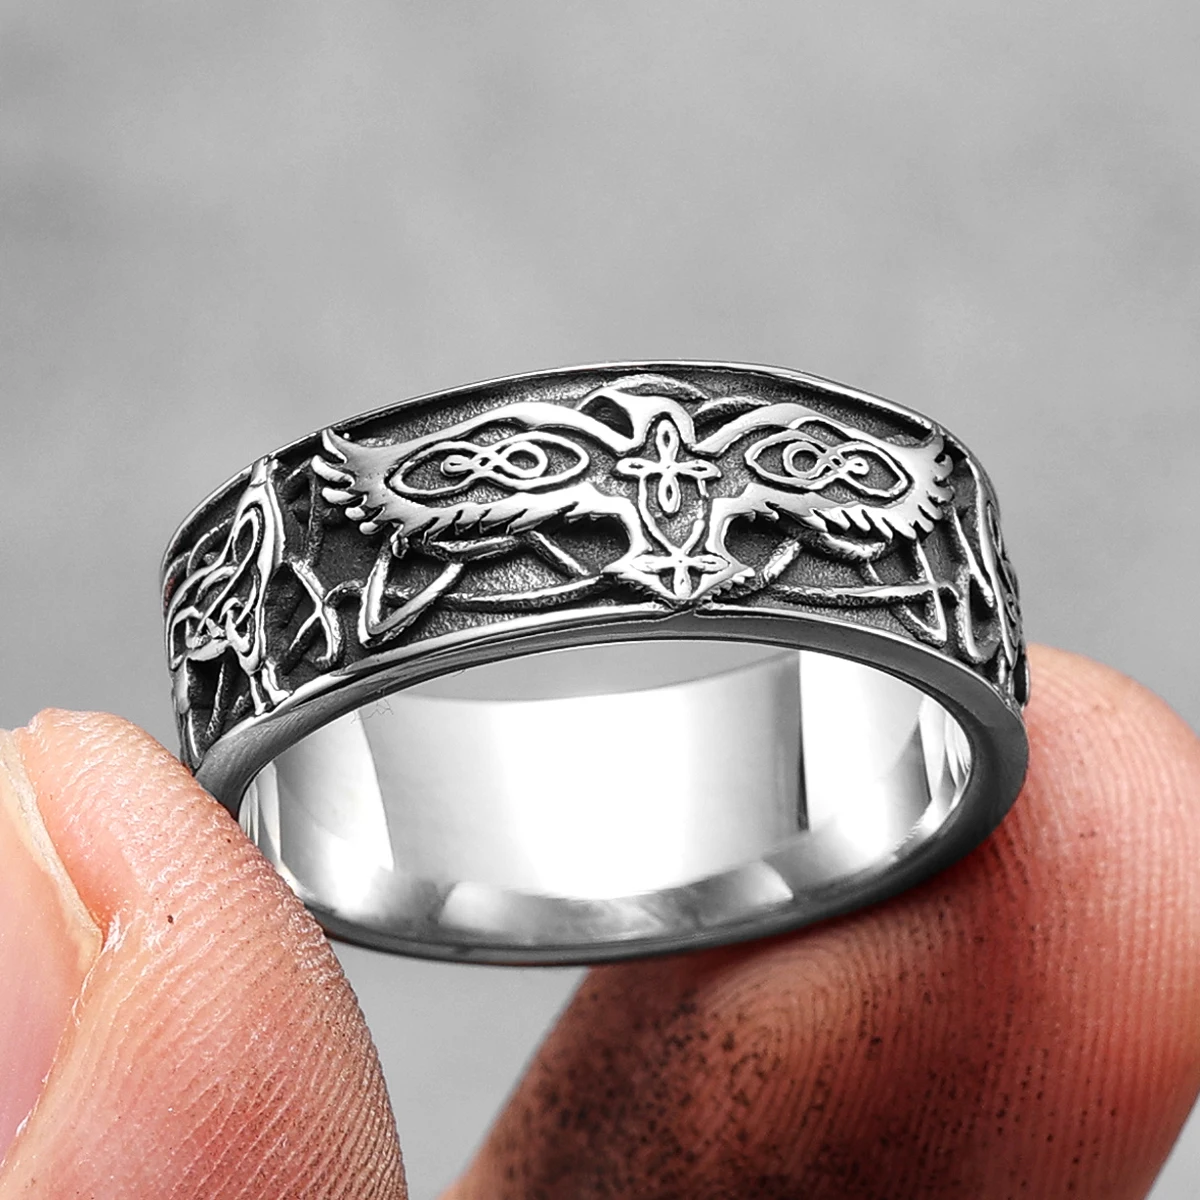 

Phoenix Totem Ring 316L Stainless Steel Men Auspicious Rings Trendy for Biker Male Friend Jewelry Creative Gift Dropshipping